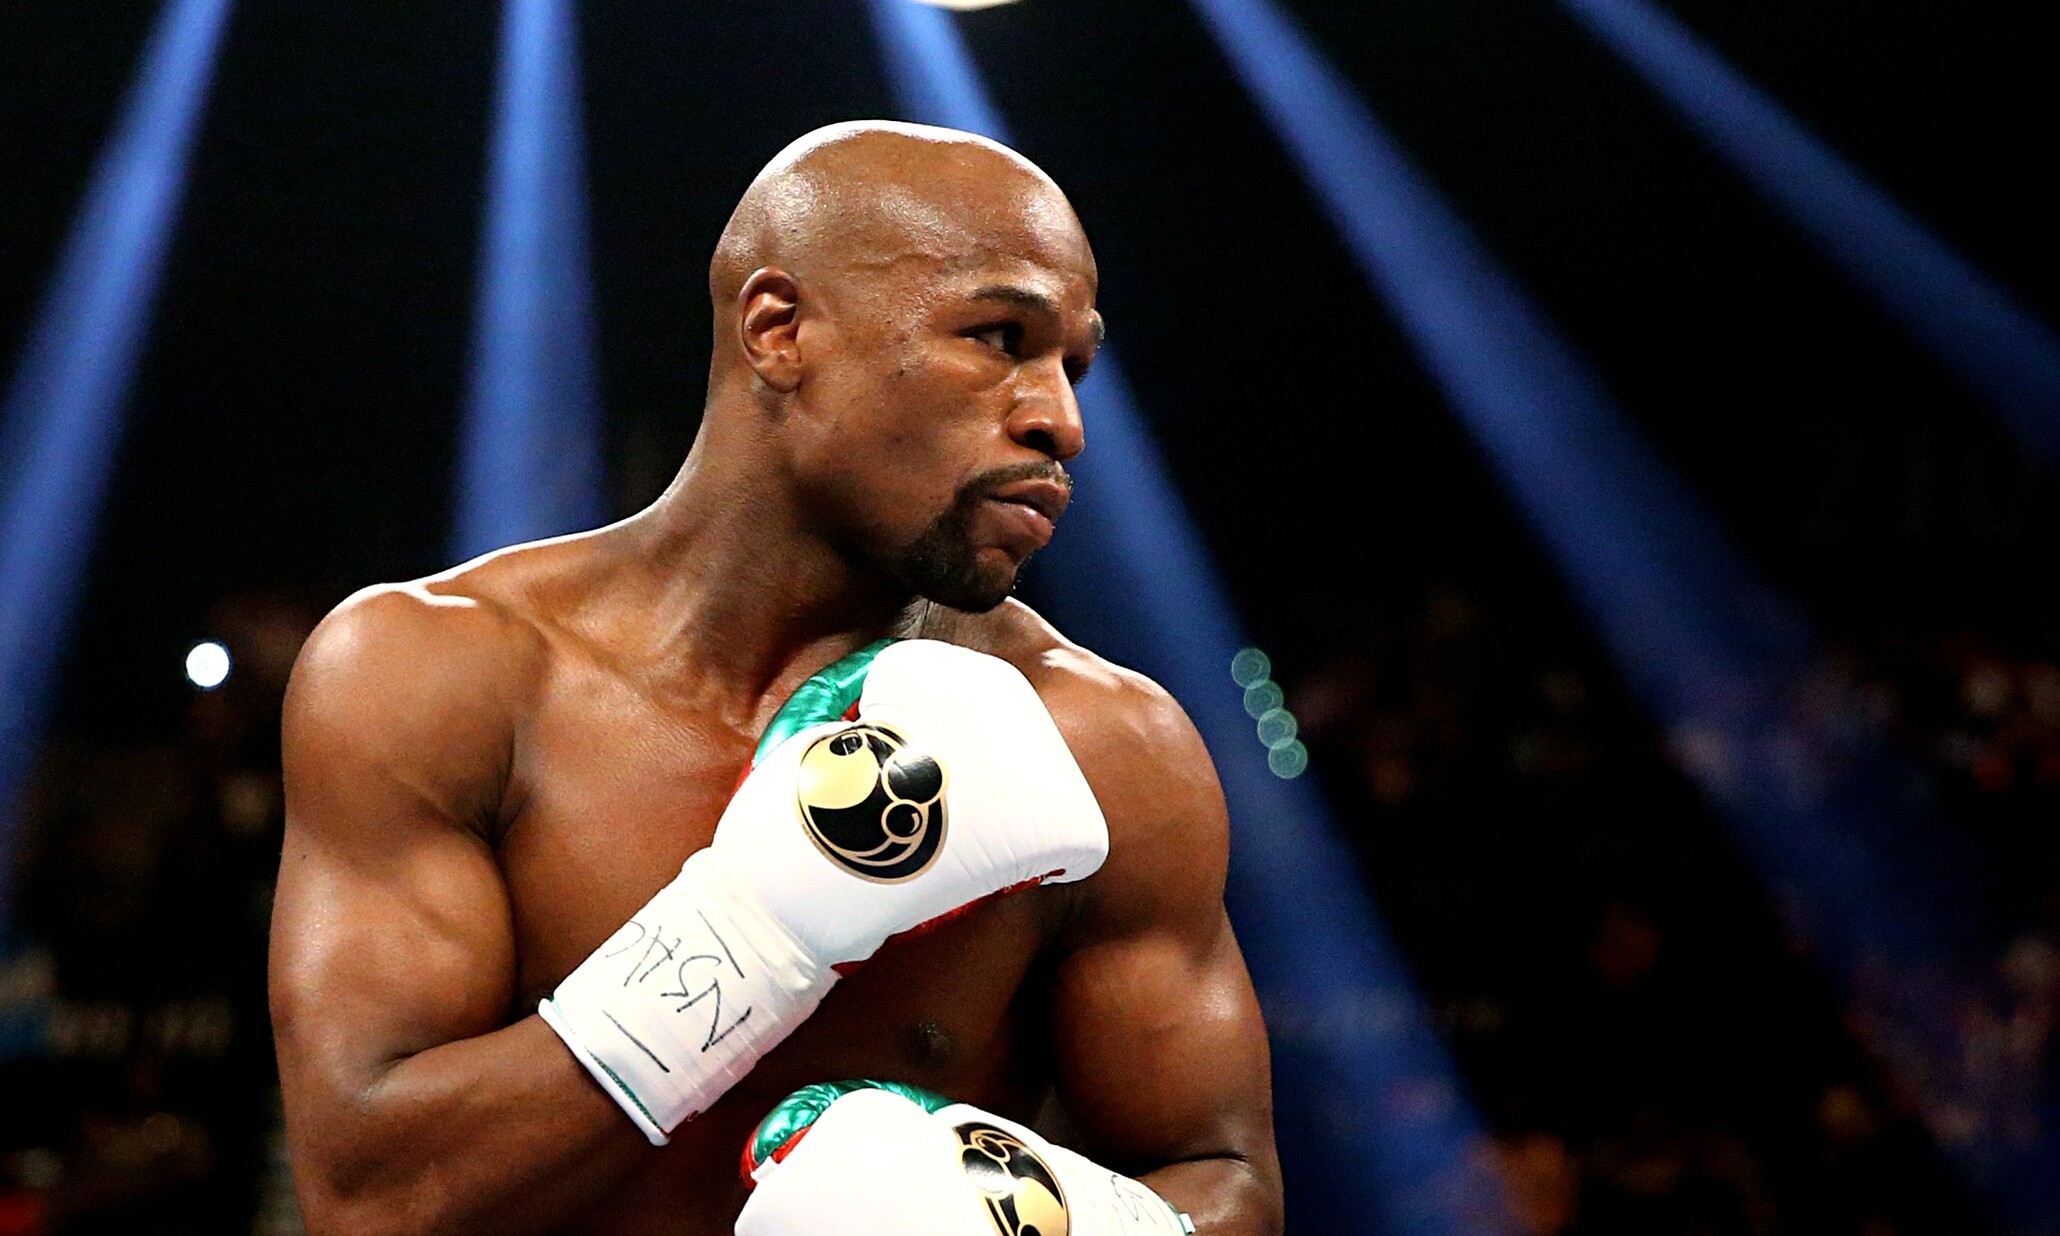 Floyd Mayweather, Sports wallpapers, Athletic success, Boxing greatness, 2060x1240 HD Desktop